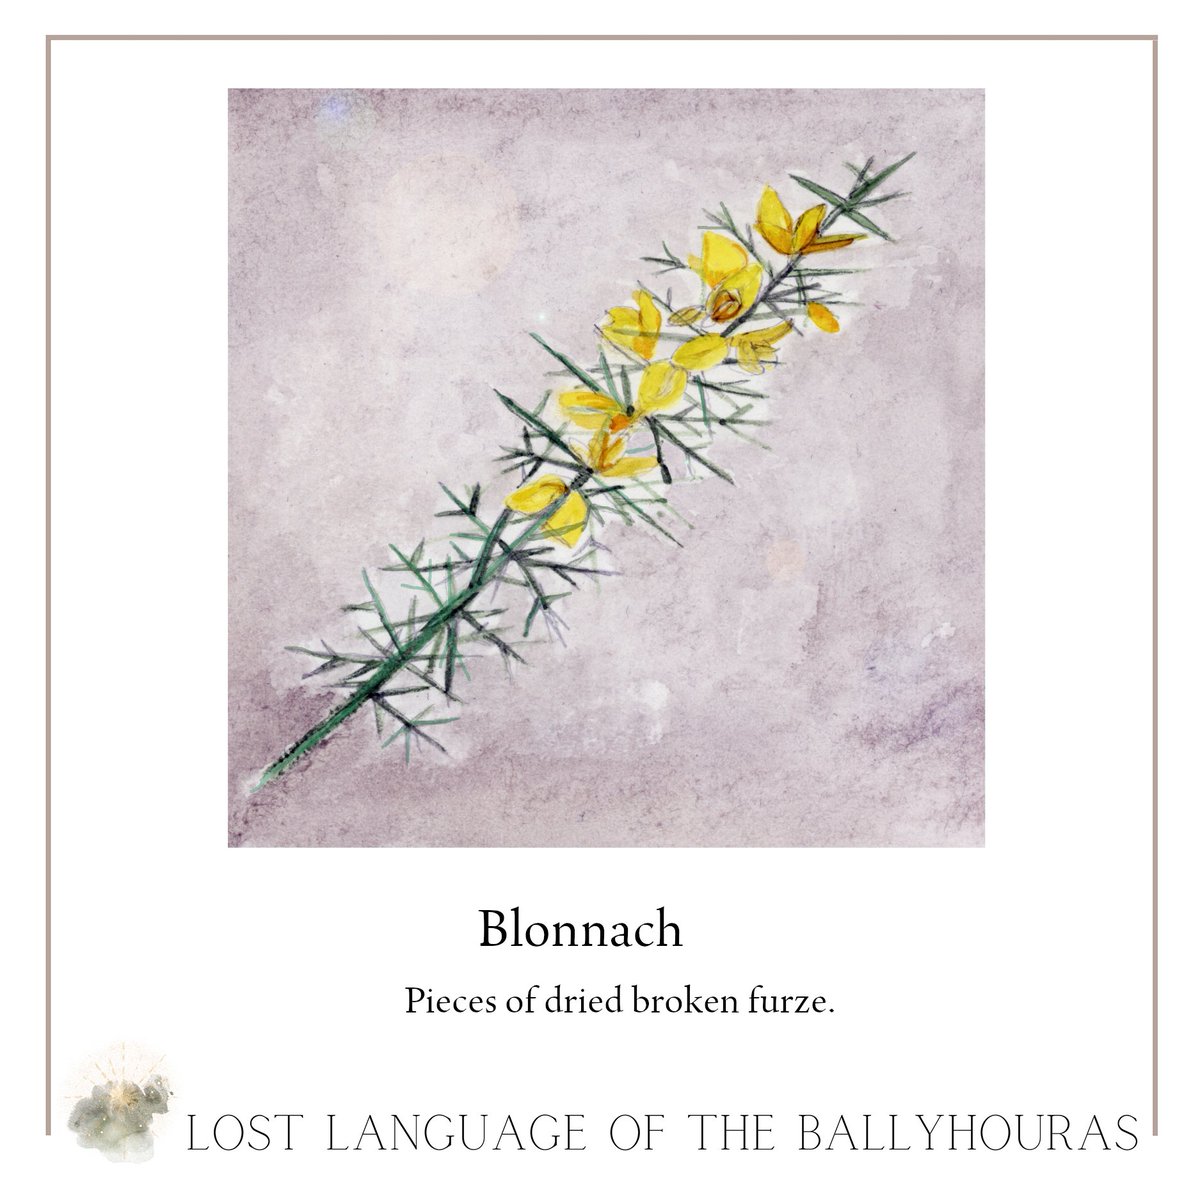 BLONNACH
Pieces of dried broken furze. Gather up the blonnach, the brussy stuff.

Illustration: Enagh Farrell

From:  The Lost Language of the Ballyhouras:
Cnuasach Focal Paddy Fennessy, ed by Evelyn Fennessy & Róisín Ní Ghairbhí.
Buy: evelynfennessy@gmail.com or @ansiopaleabhar